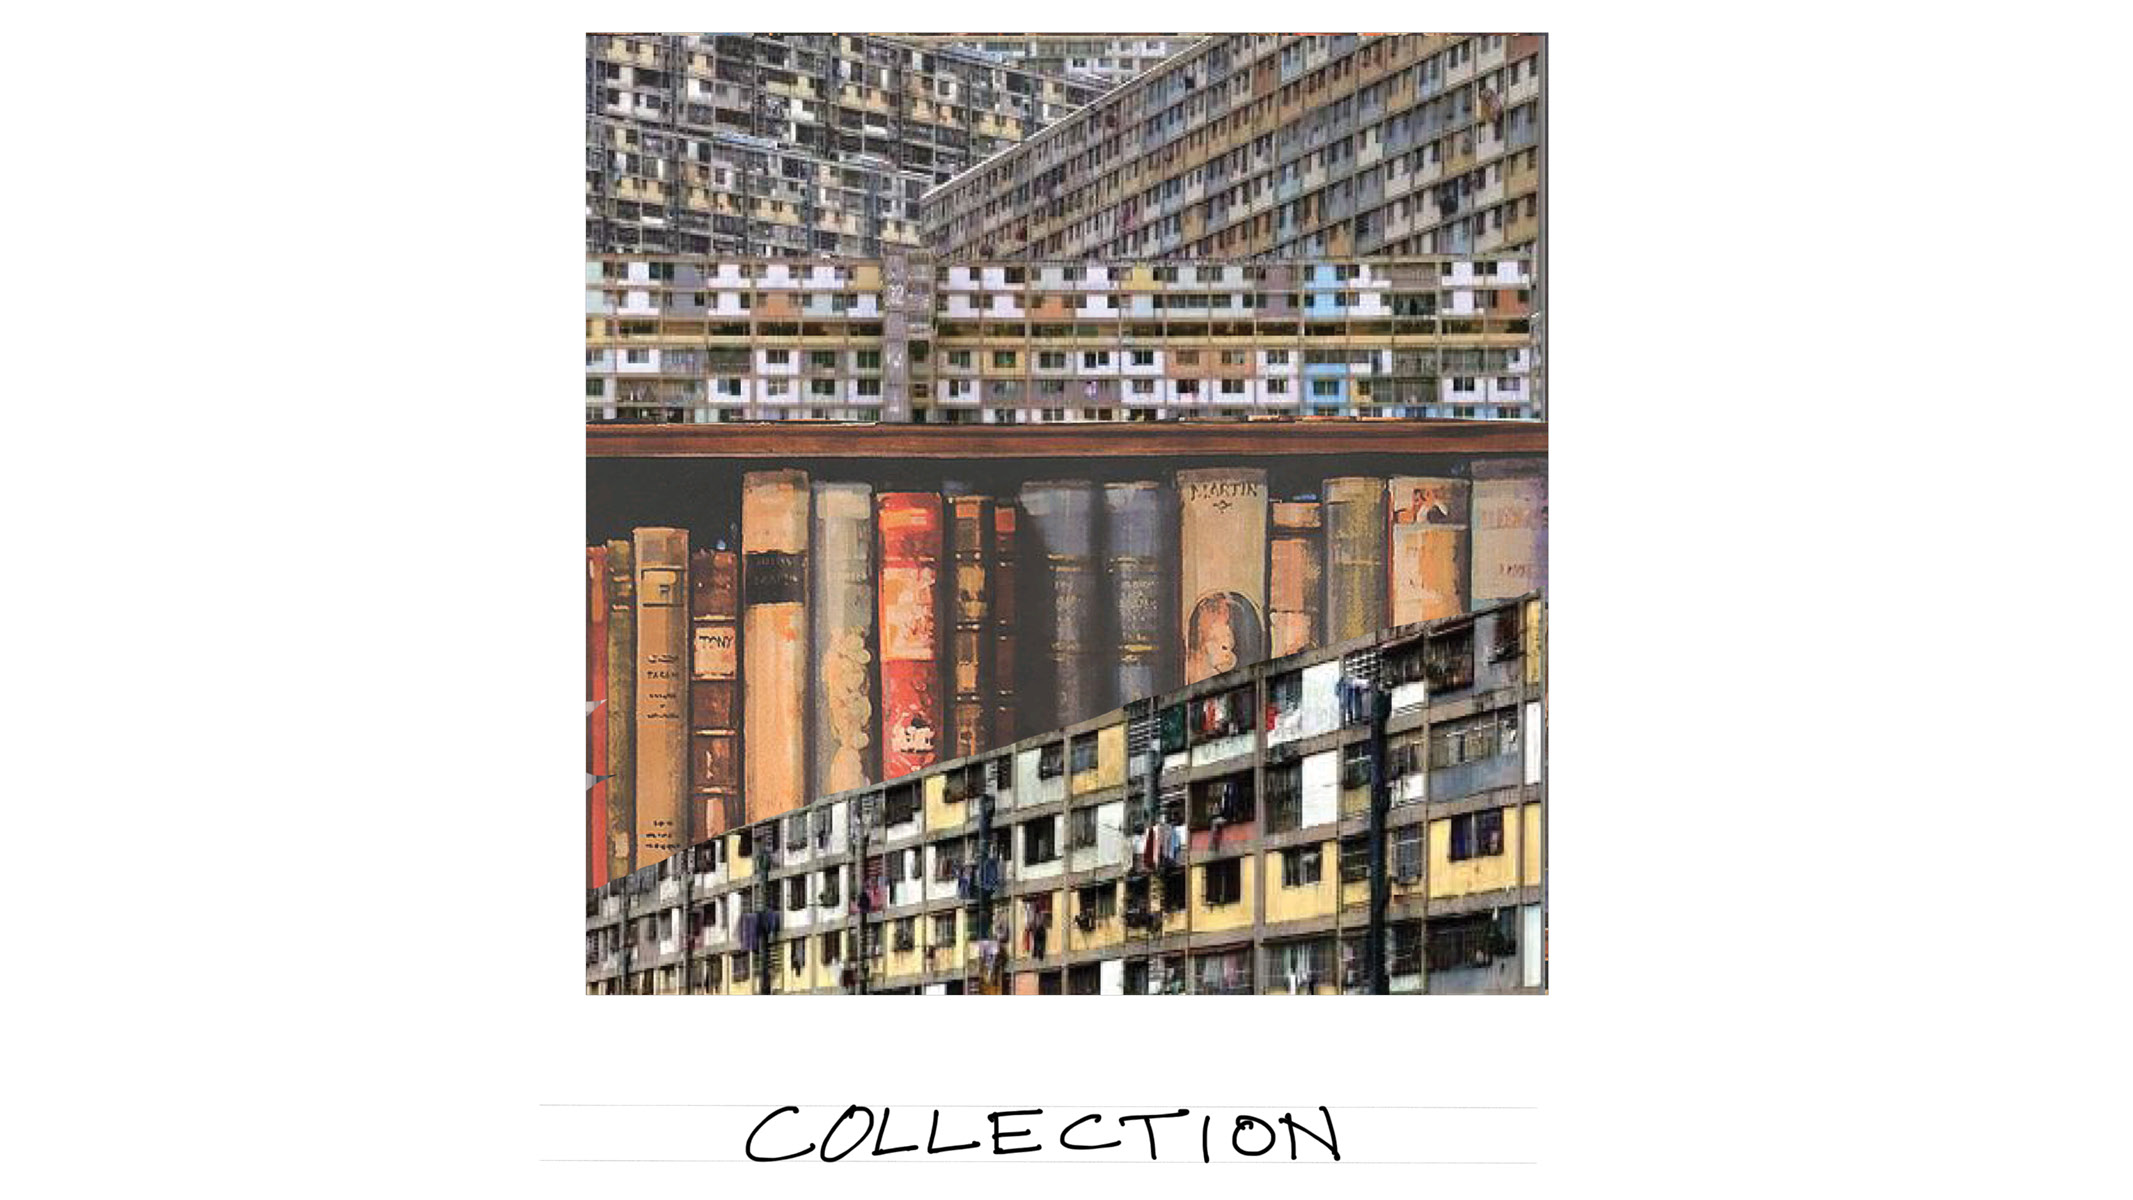 Flashcard: Collection